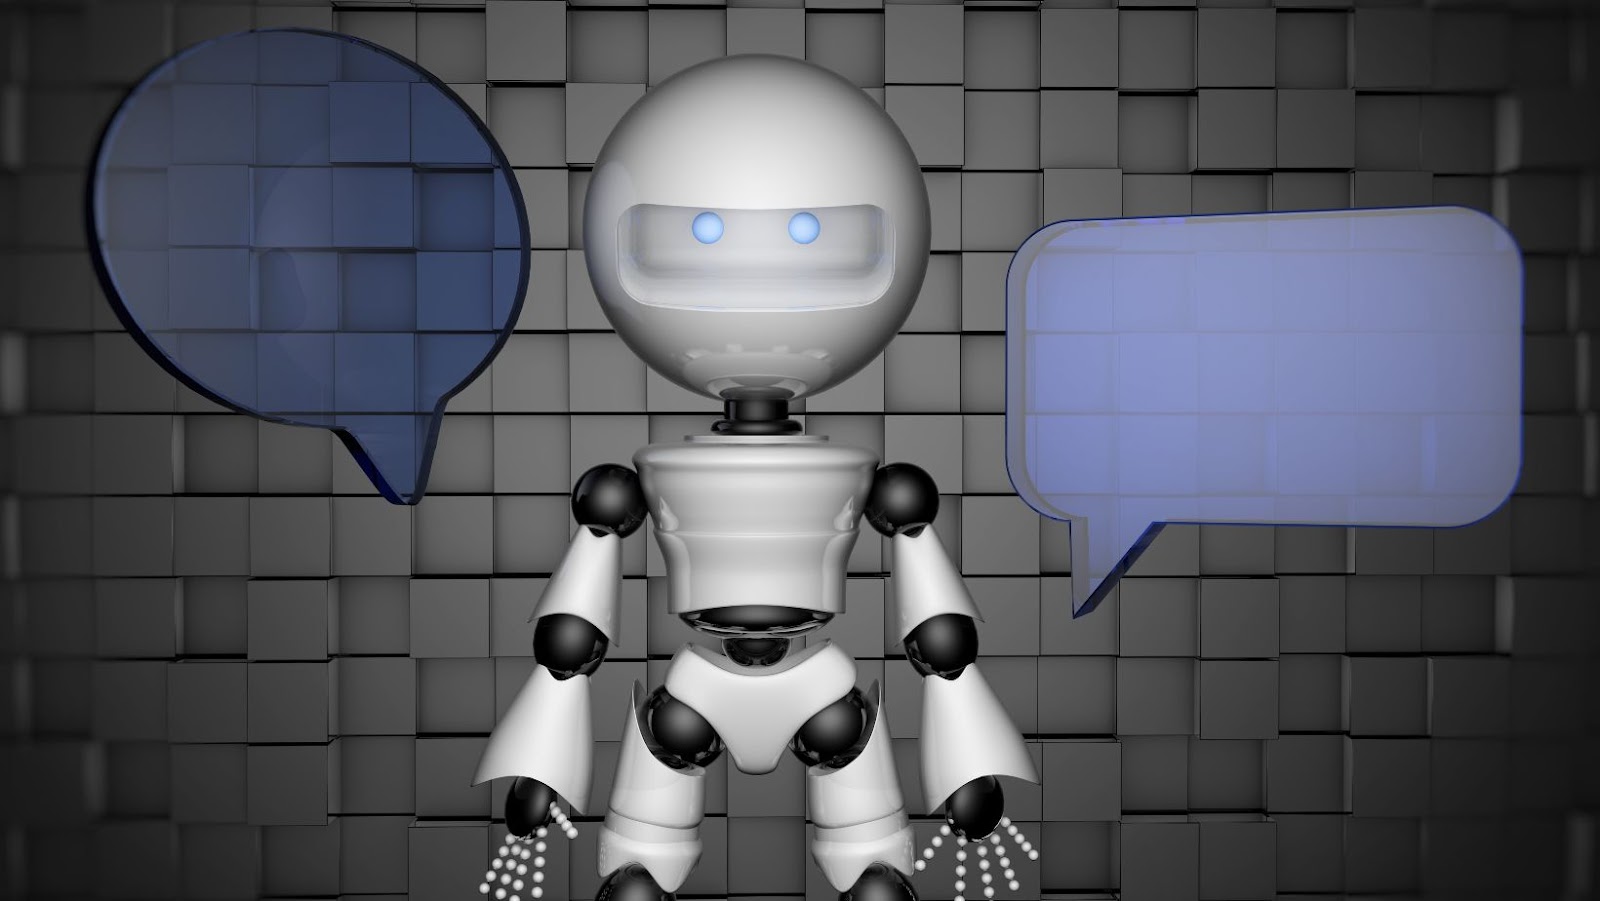 Protect Myself From Chatbot Risks?